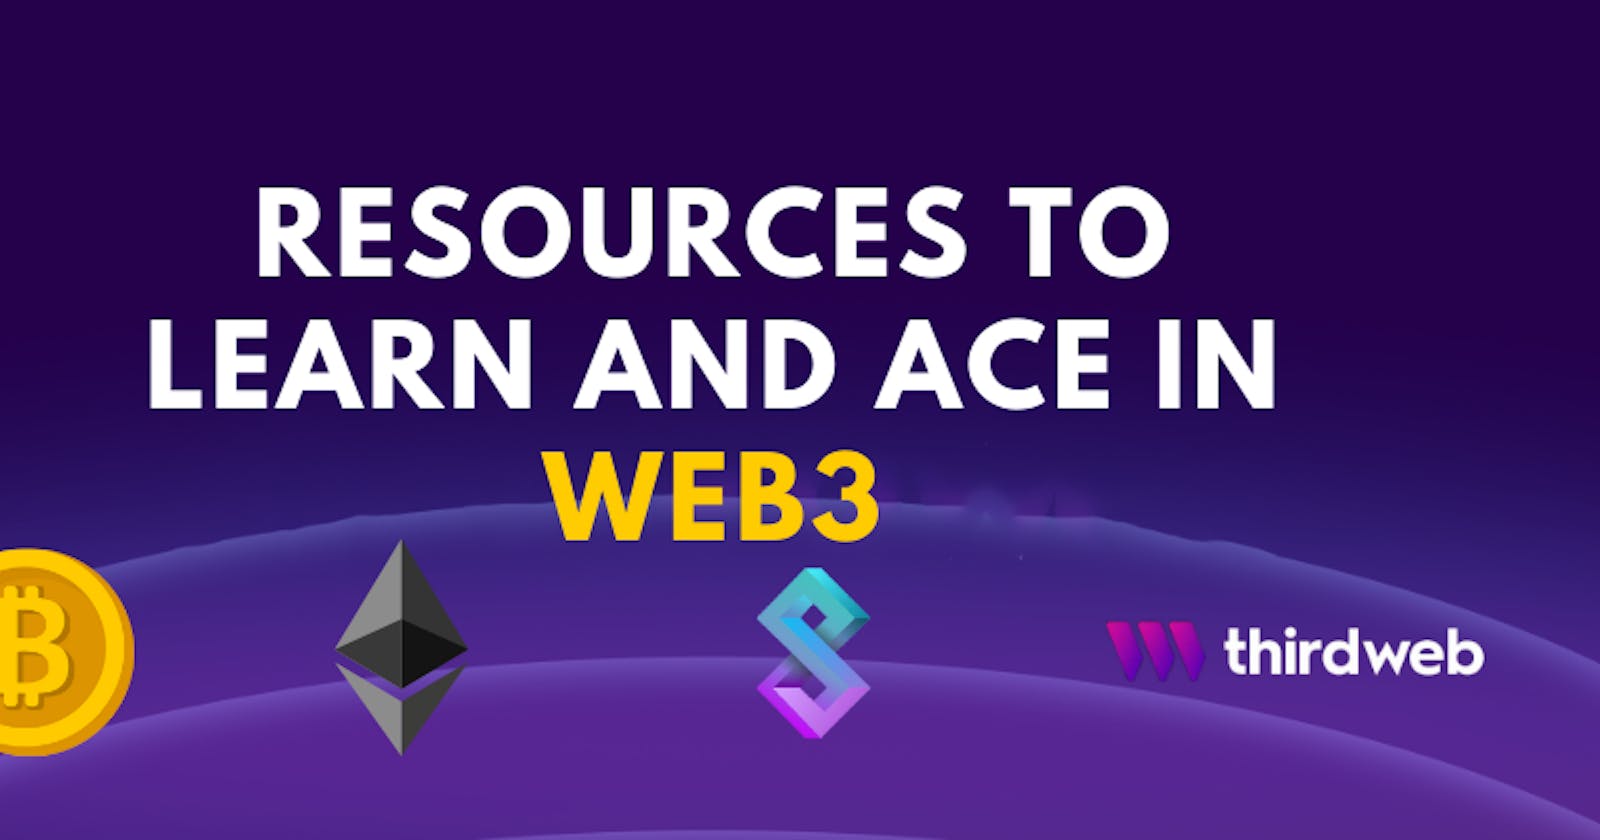 Web 3 RoadMap with Resources to learn